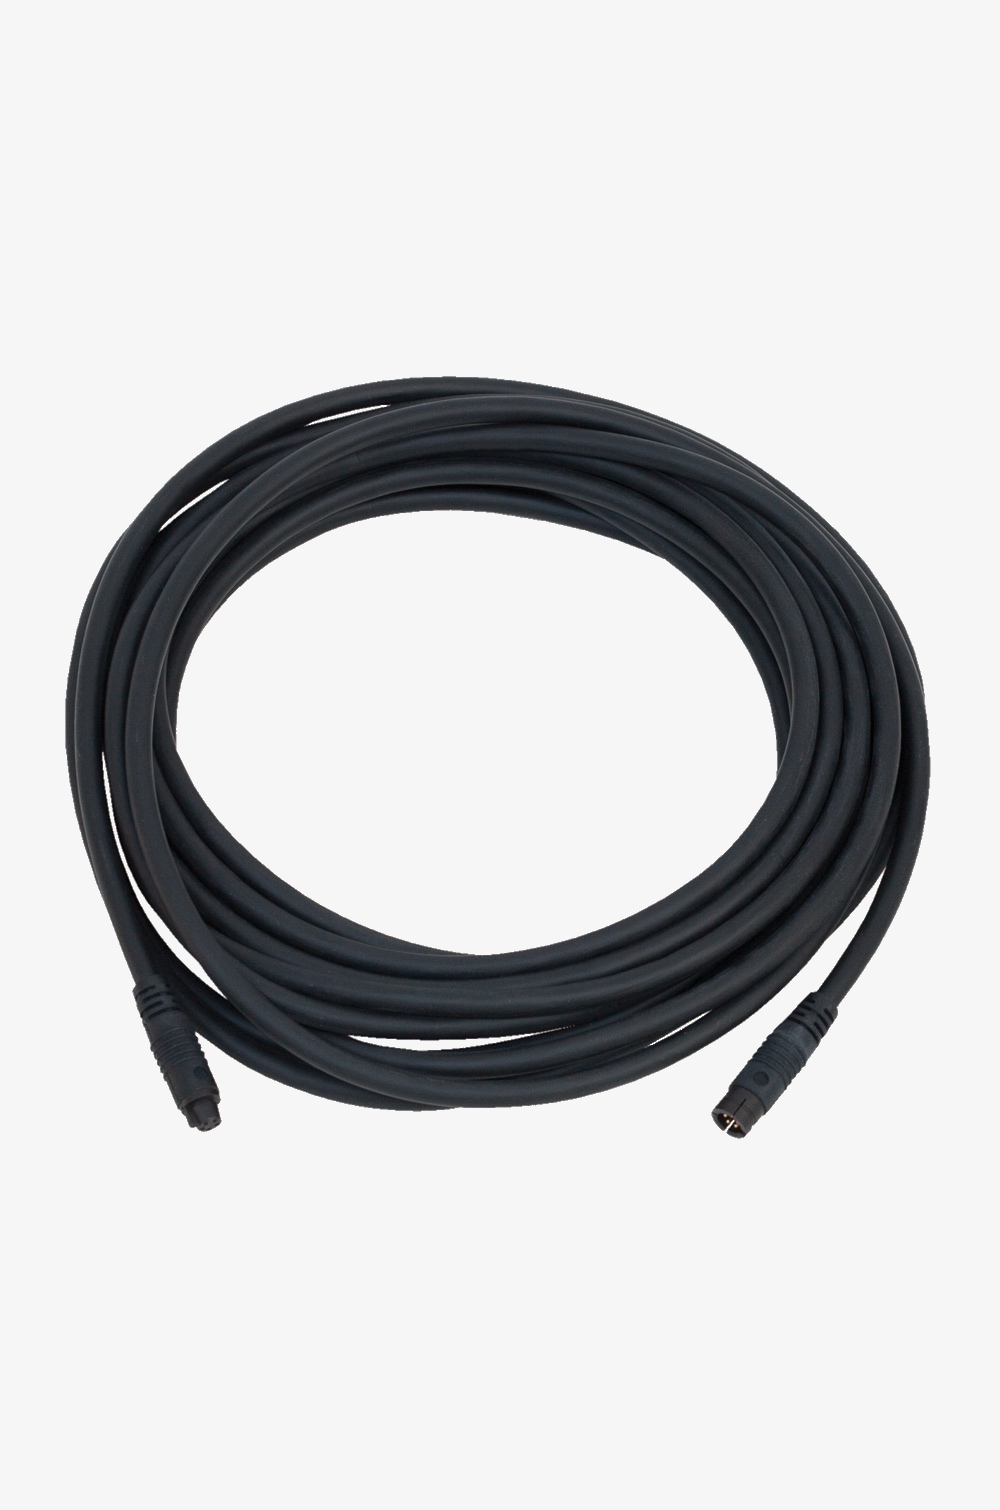 Connecting Cable for Remote Control (5m)